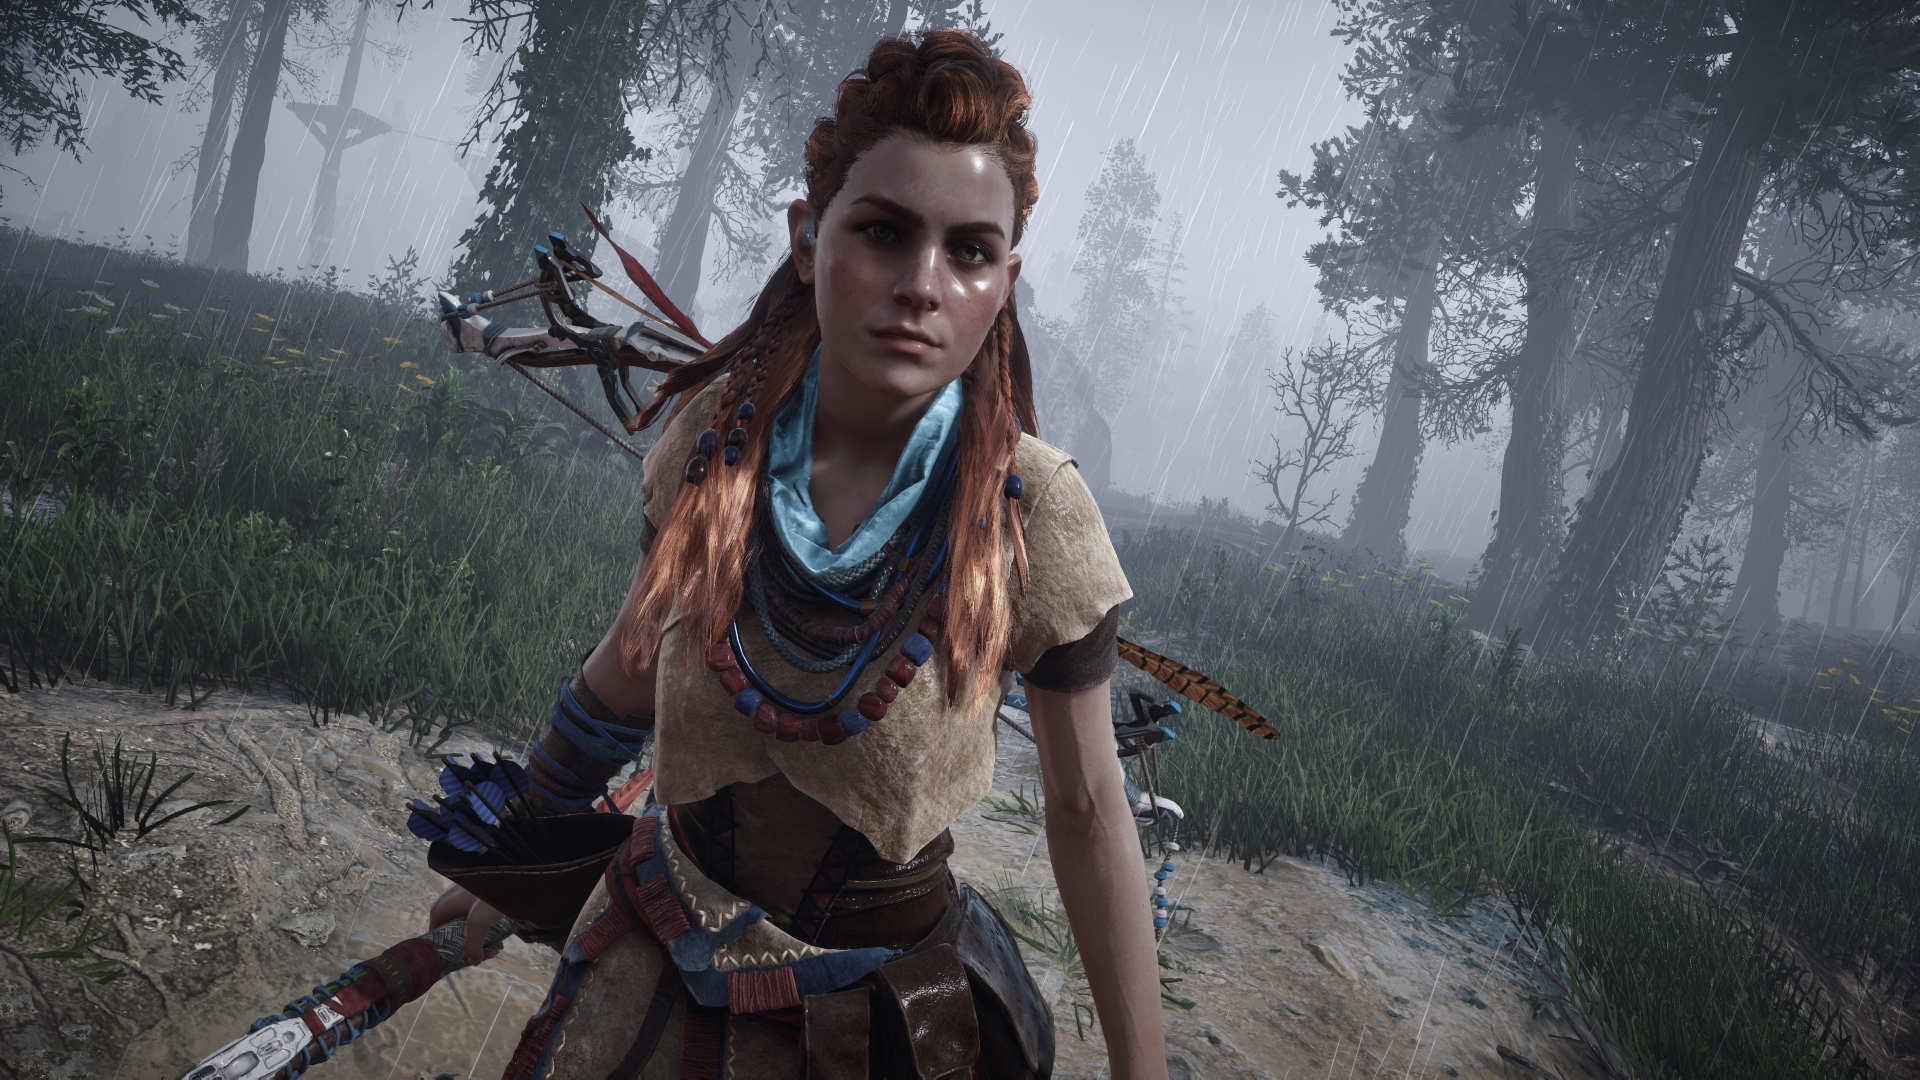 aloy from horizon zero dawn might be the sexiest character from a video gam...